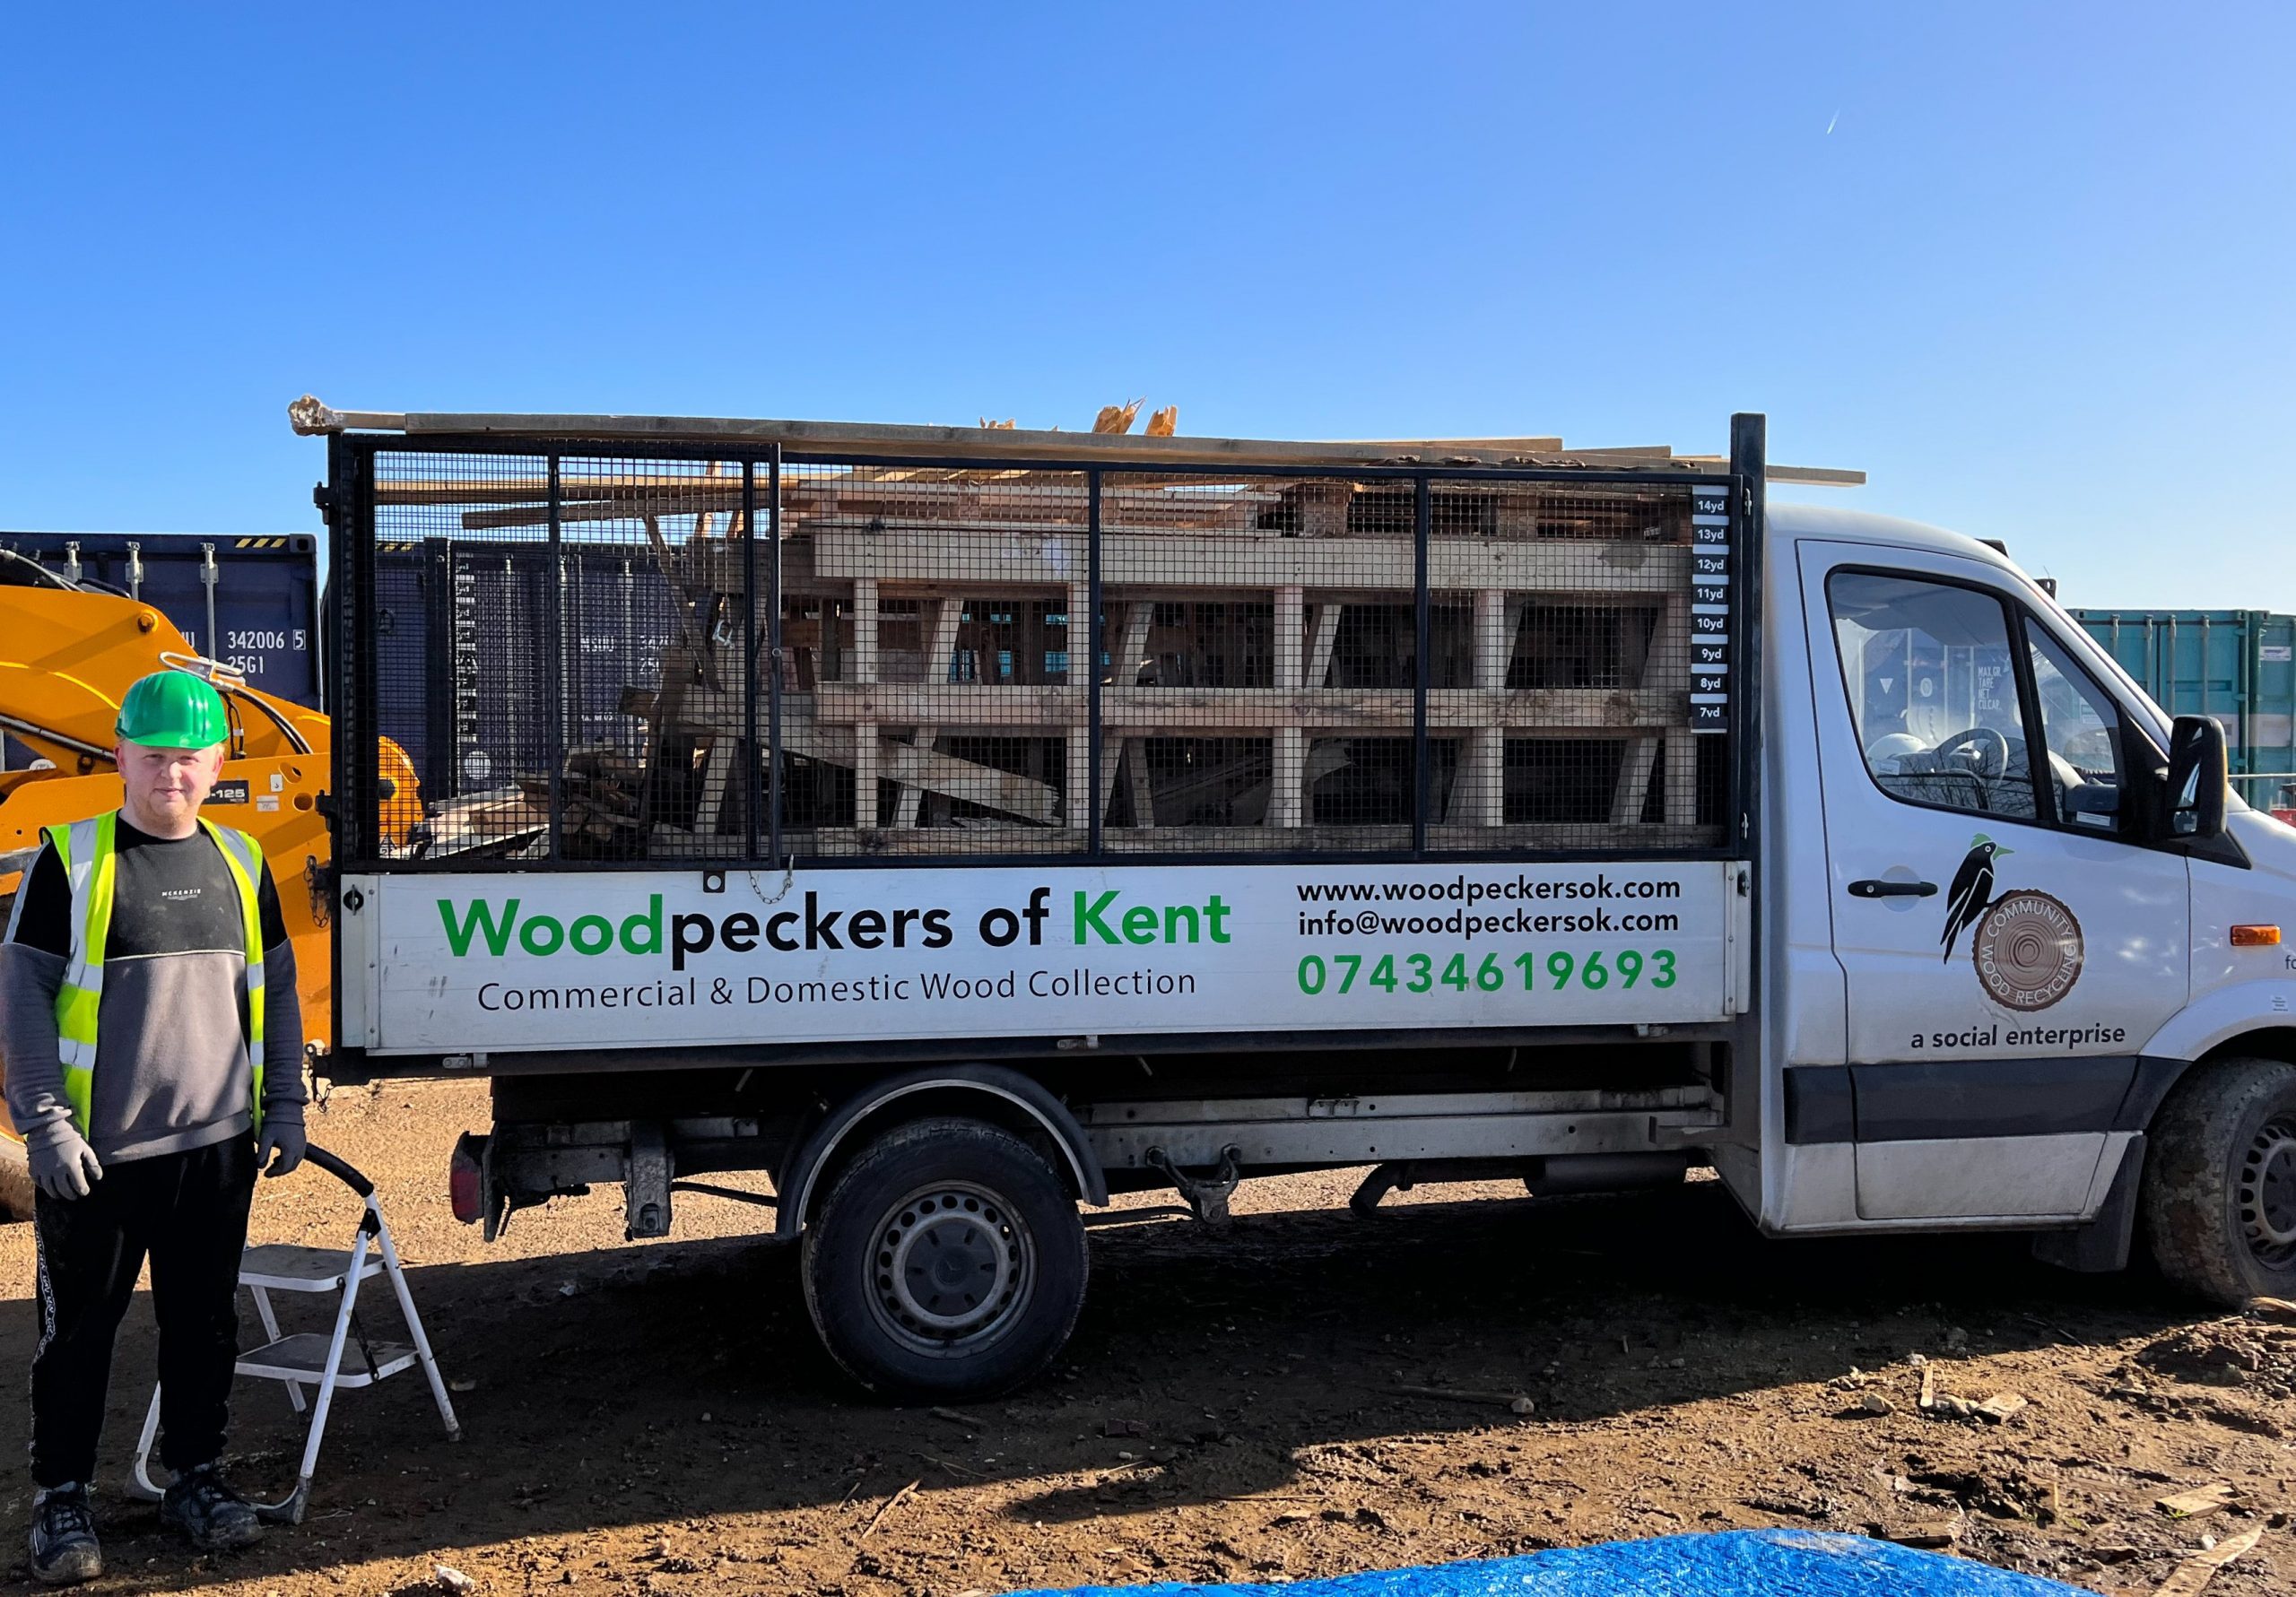 Partnering with Community Wood Recycling at Conningbrook Lakes, Ashford.